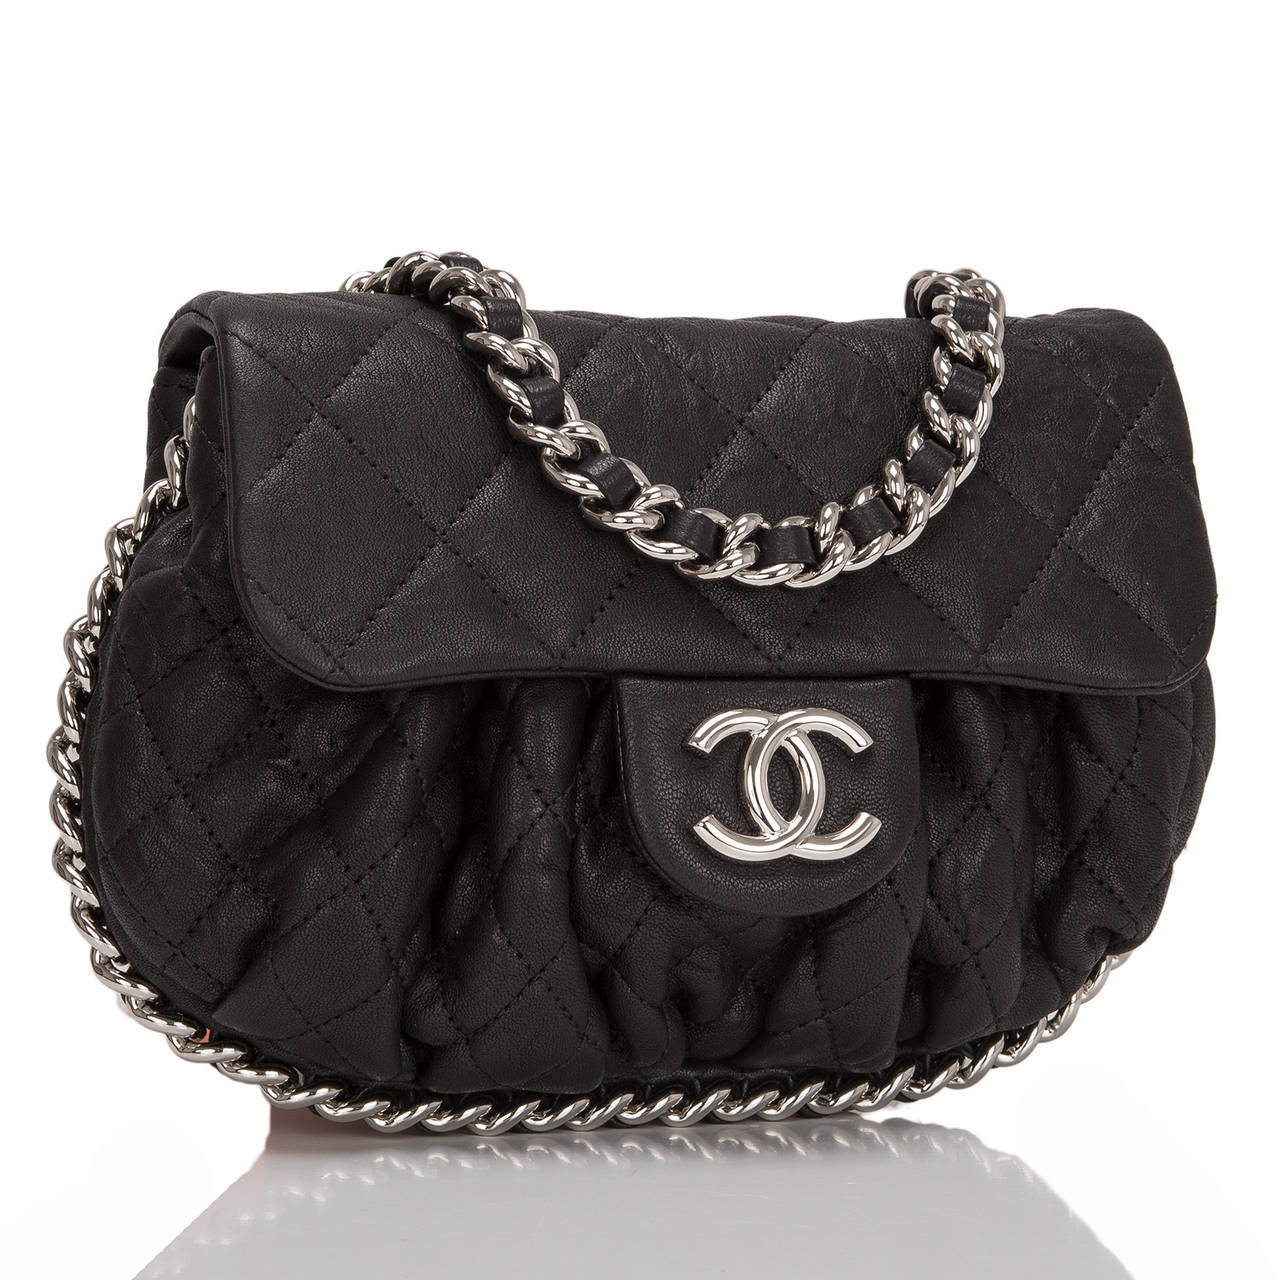 This Chanel black aged quilted lambskin Chain Around Mini crossbody messenger bag features silver tone hardware, ruched leather accent, front flap with CC, hidden snap closure, and interwoven silver tone chain link and leather shoulder strap.

The